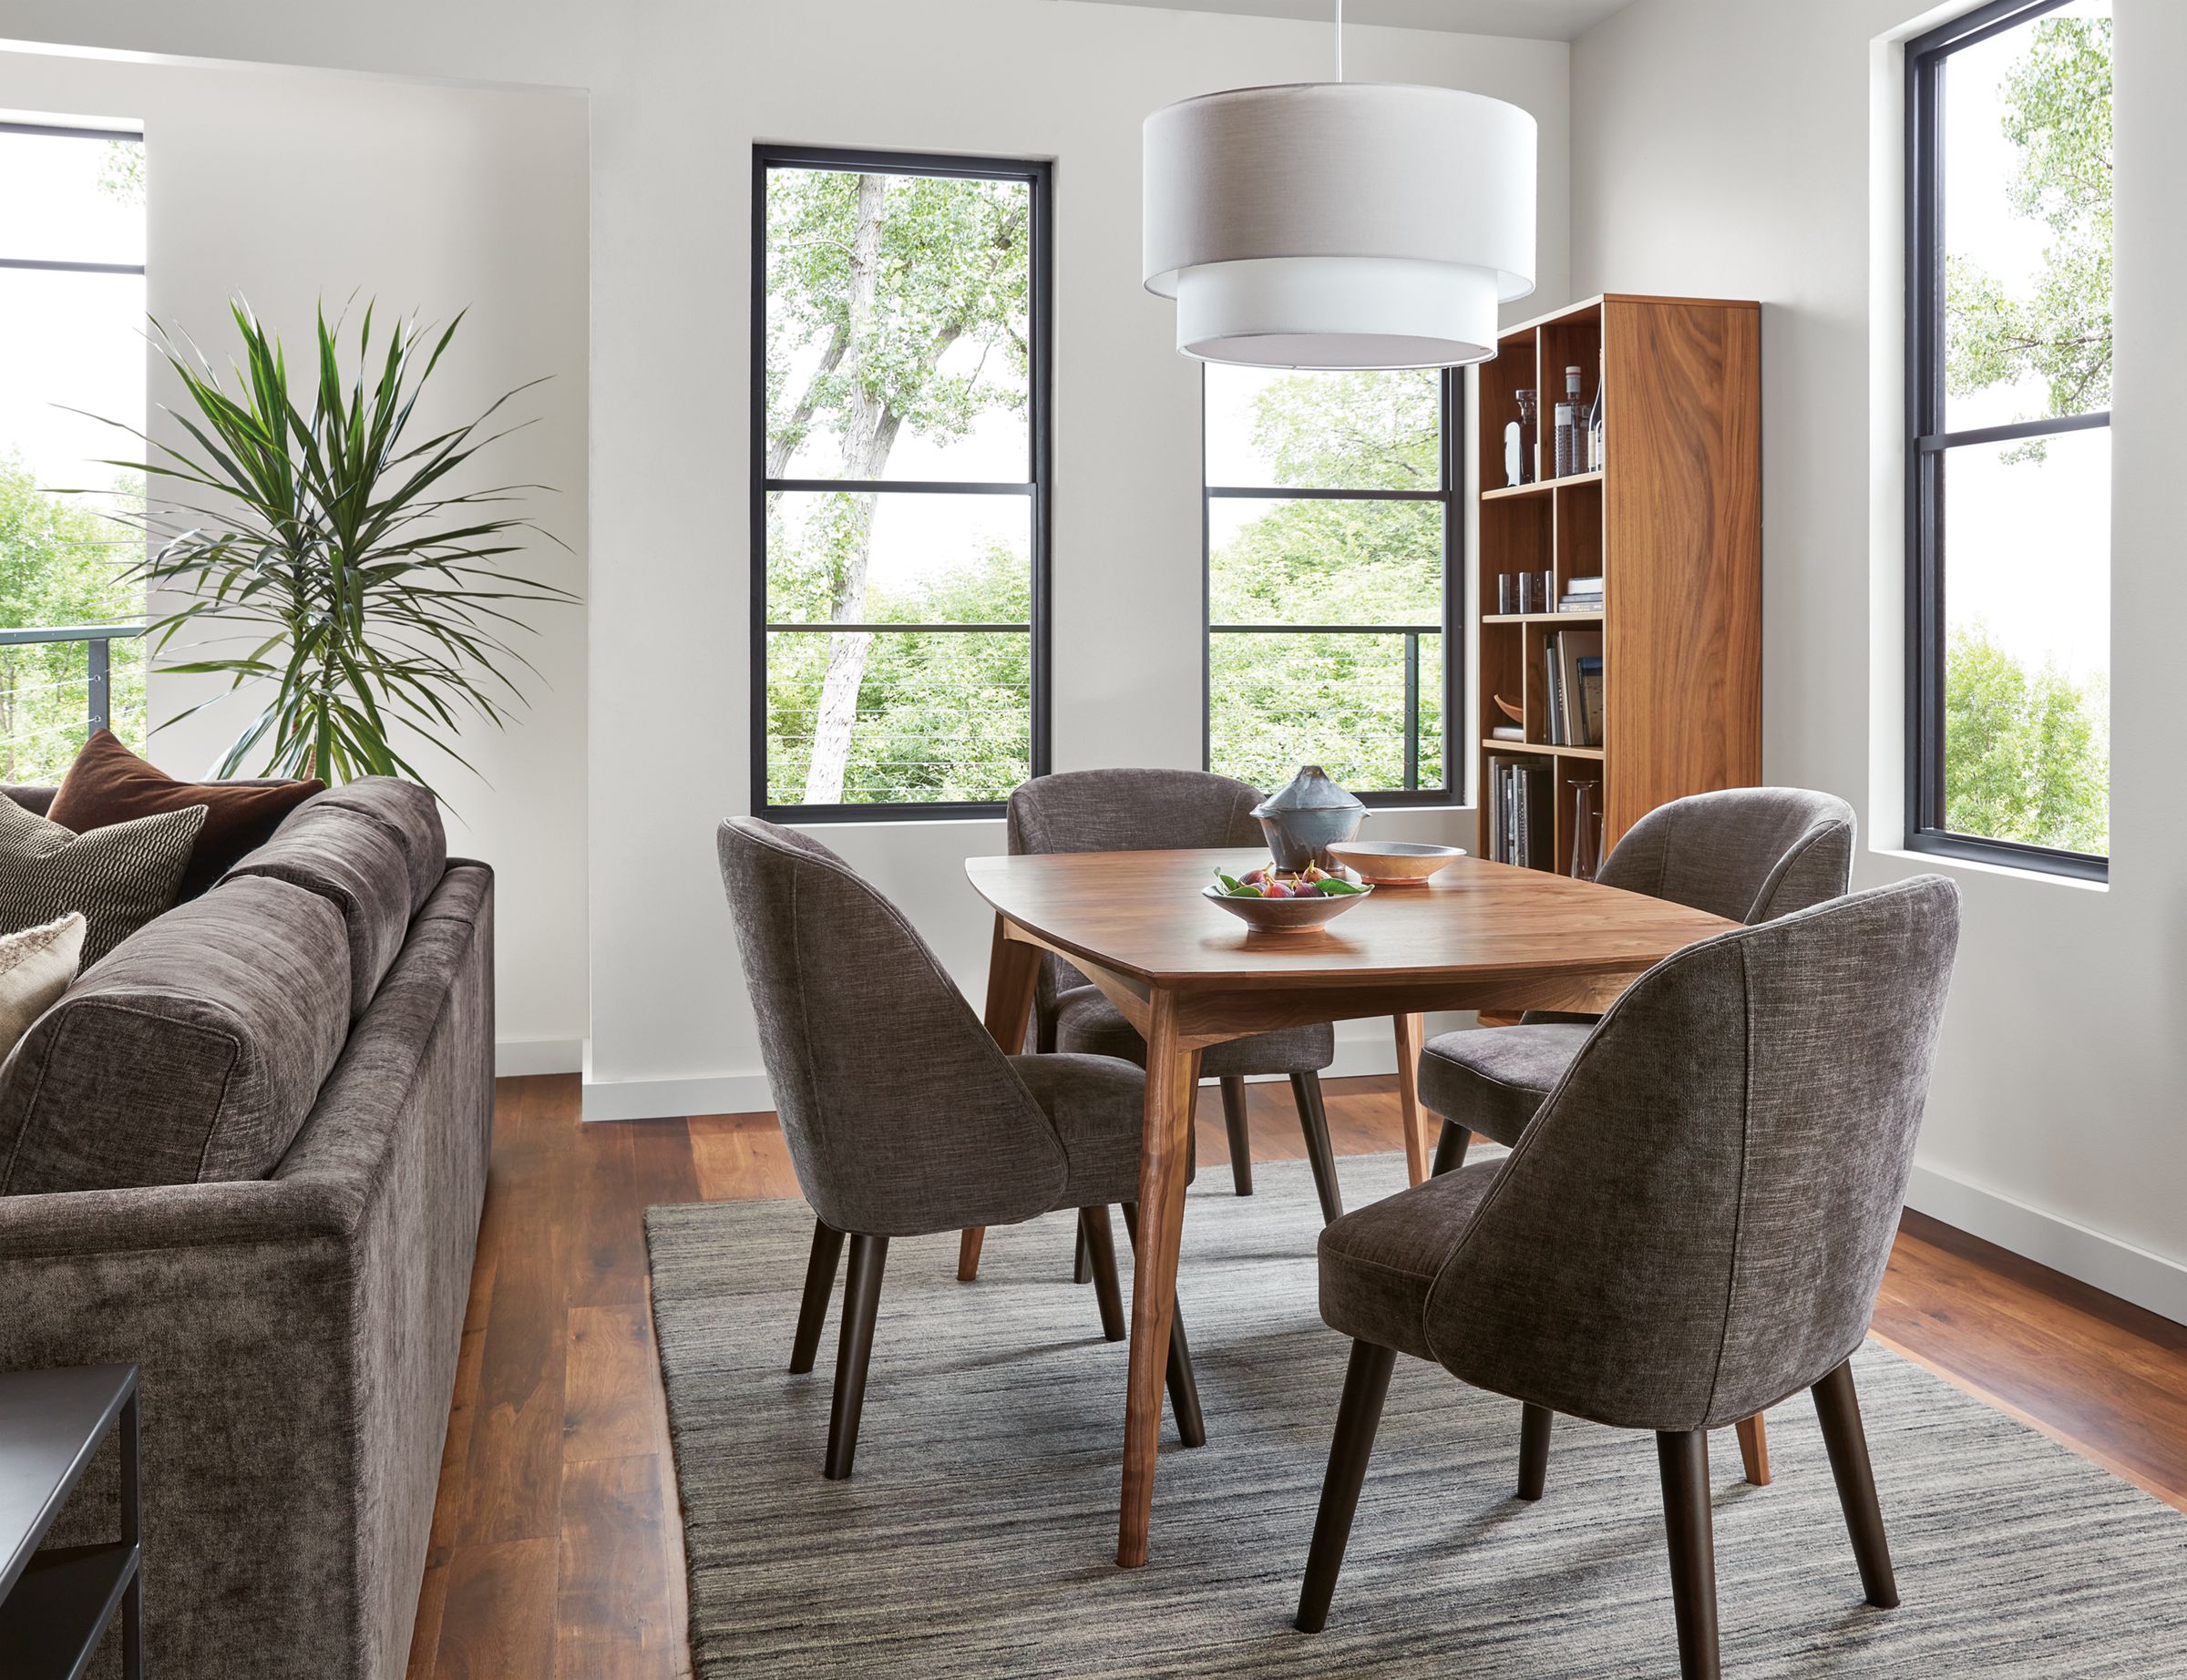 dining room with ventura extension table in walnut, cora chairs in mori charcoal, leighton pendant.